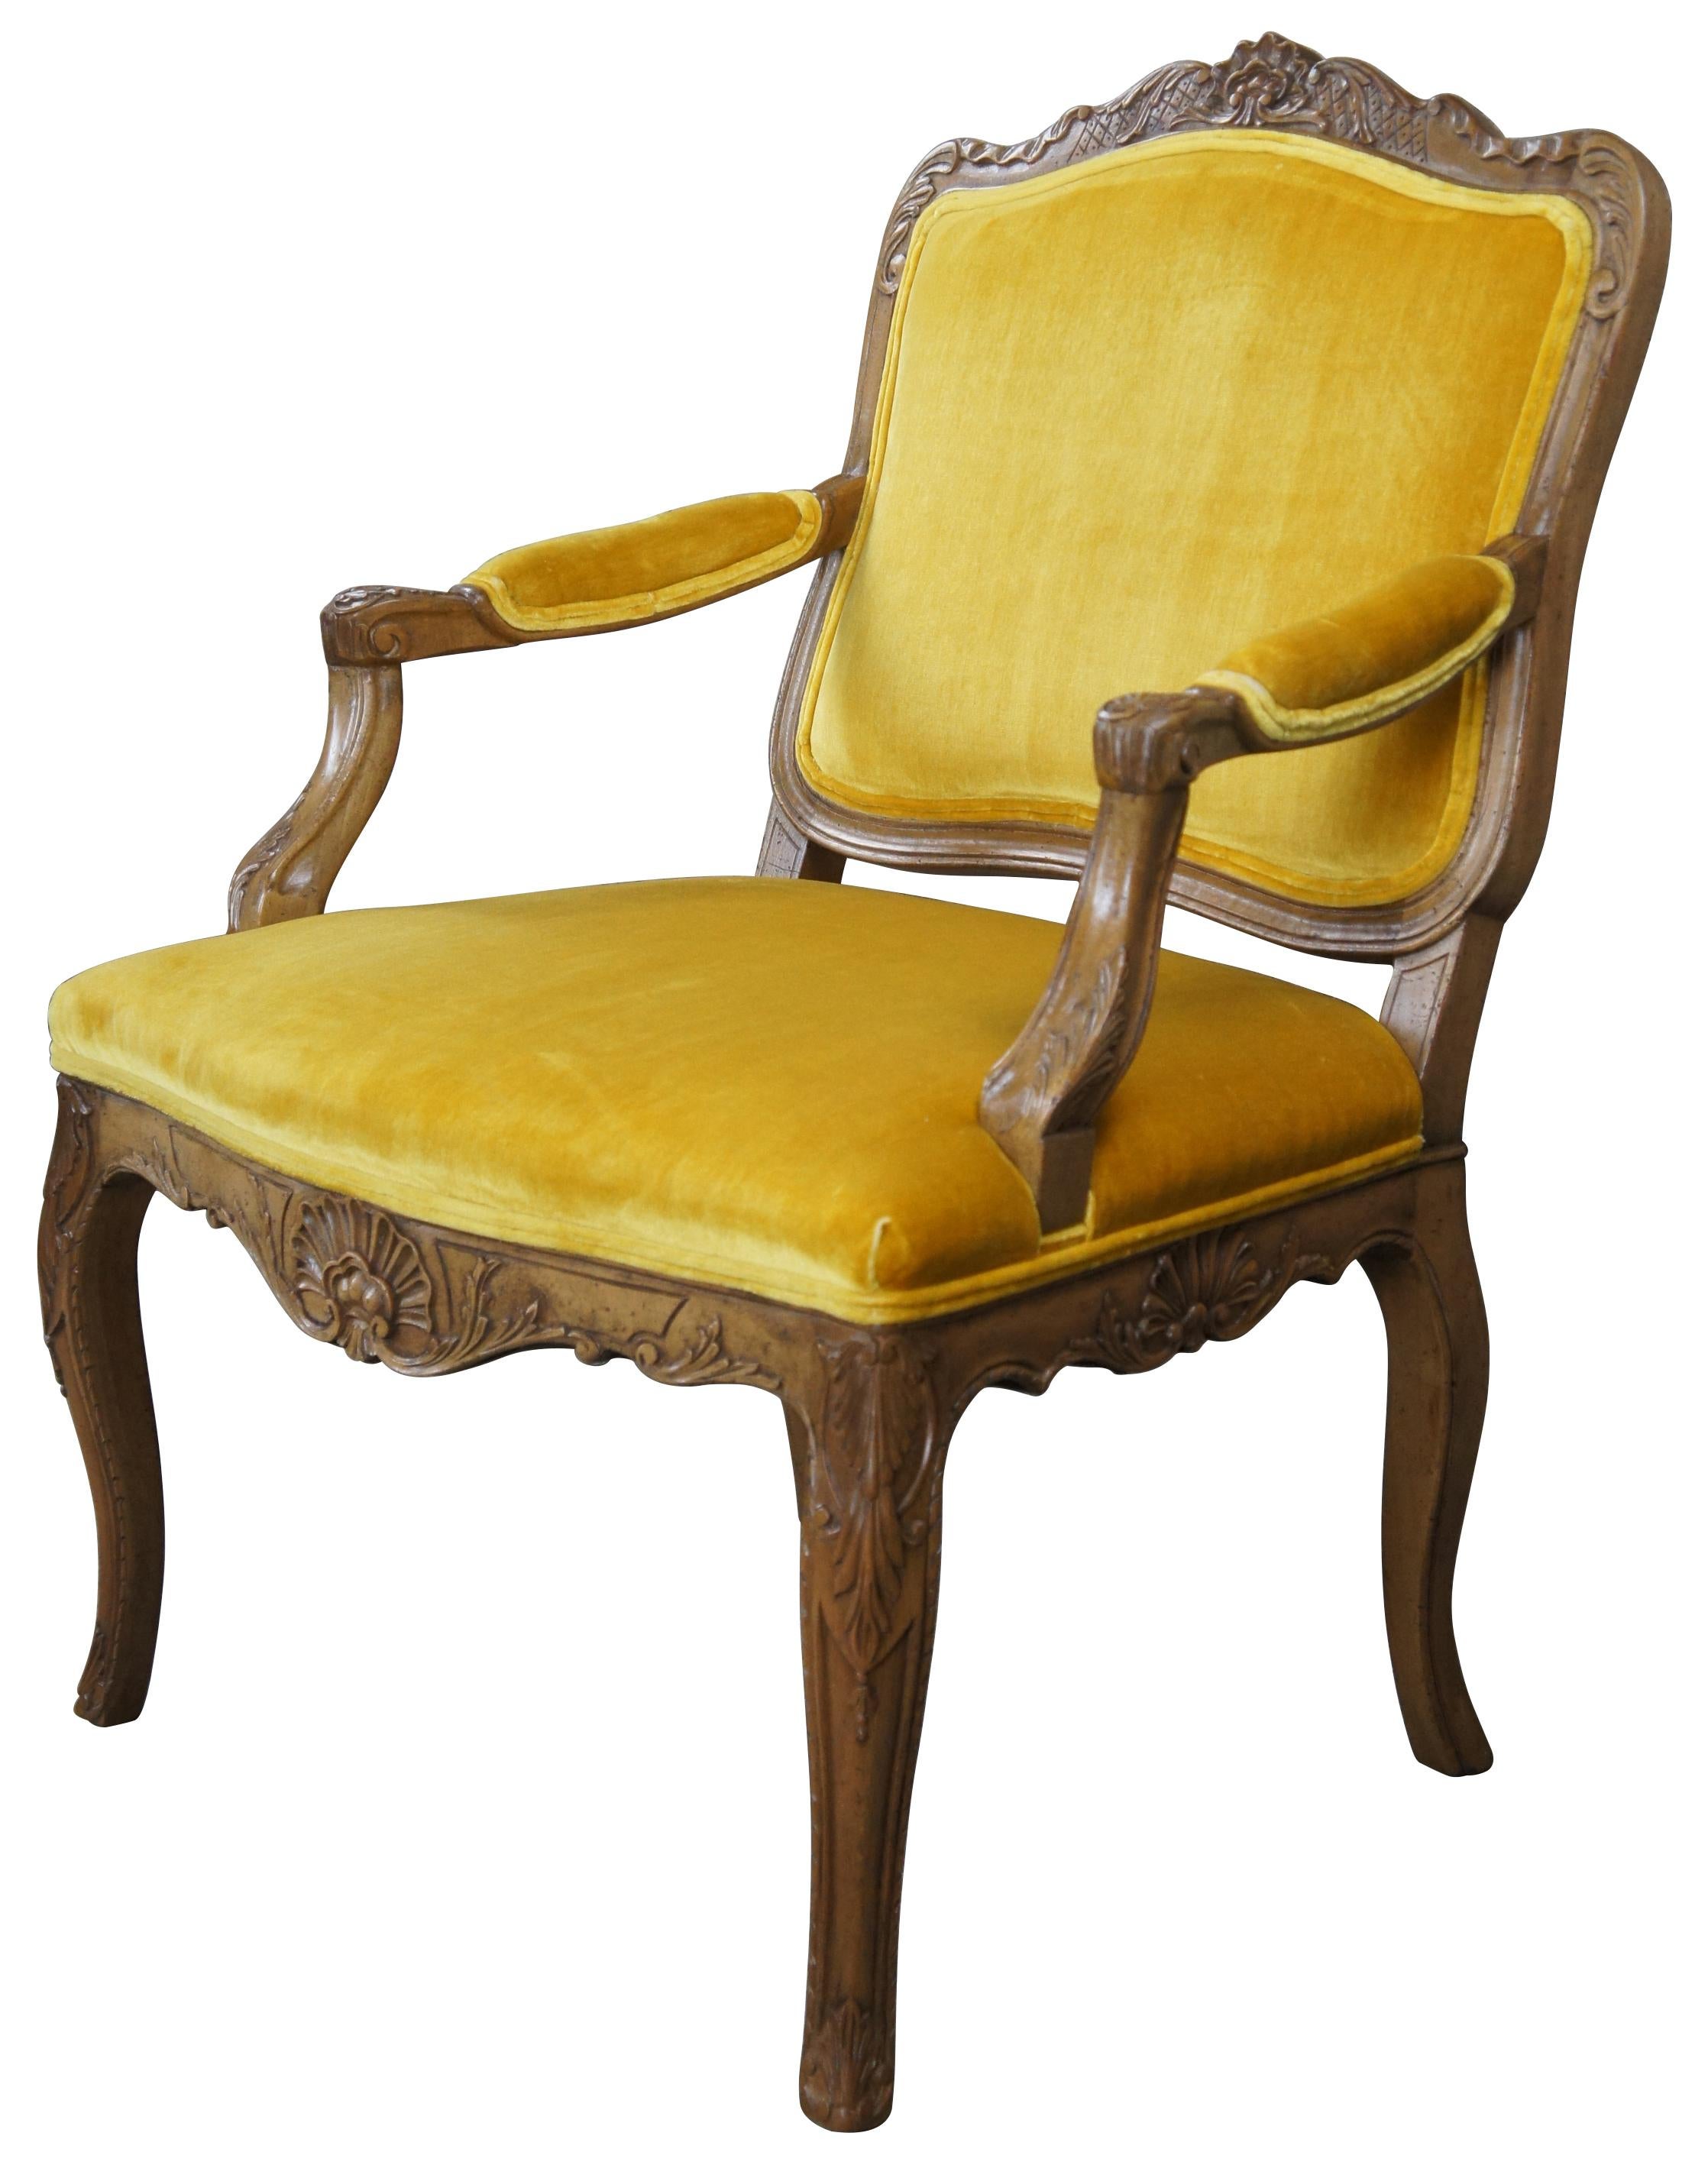 A stunning arm chair by Baker Furniture, circa 1960s. Made from naturally distressed European walnut. The frame is beautifully carved with acanthus and scalloped detail. Upholstered in yellow velvet with padded arms and cabriole feet.

Style No